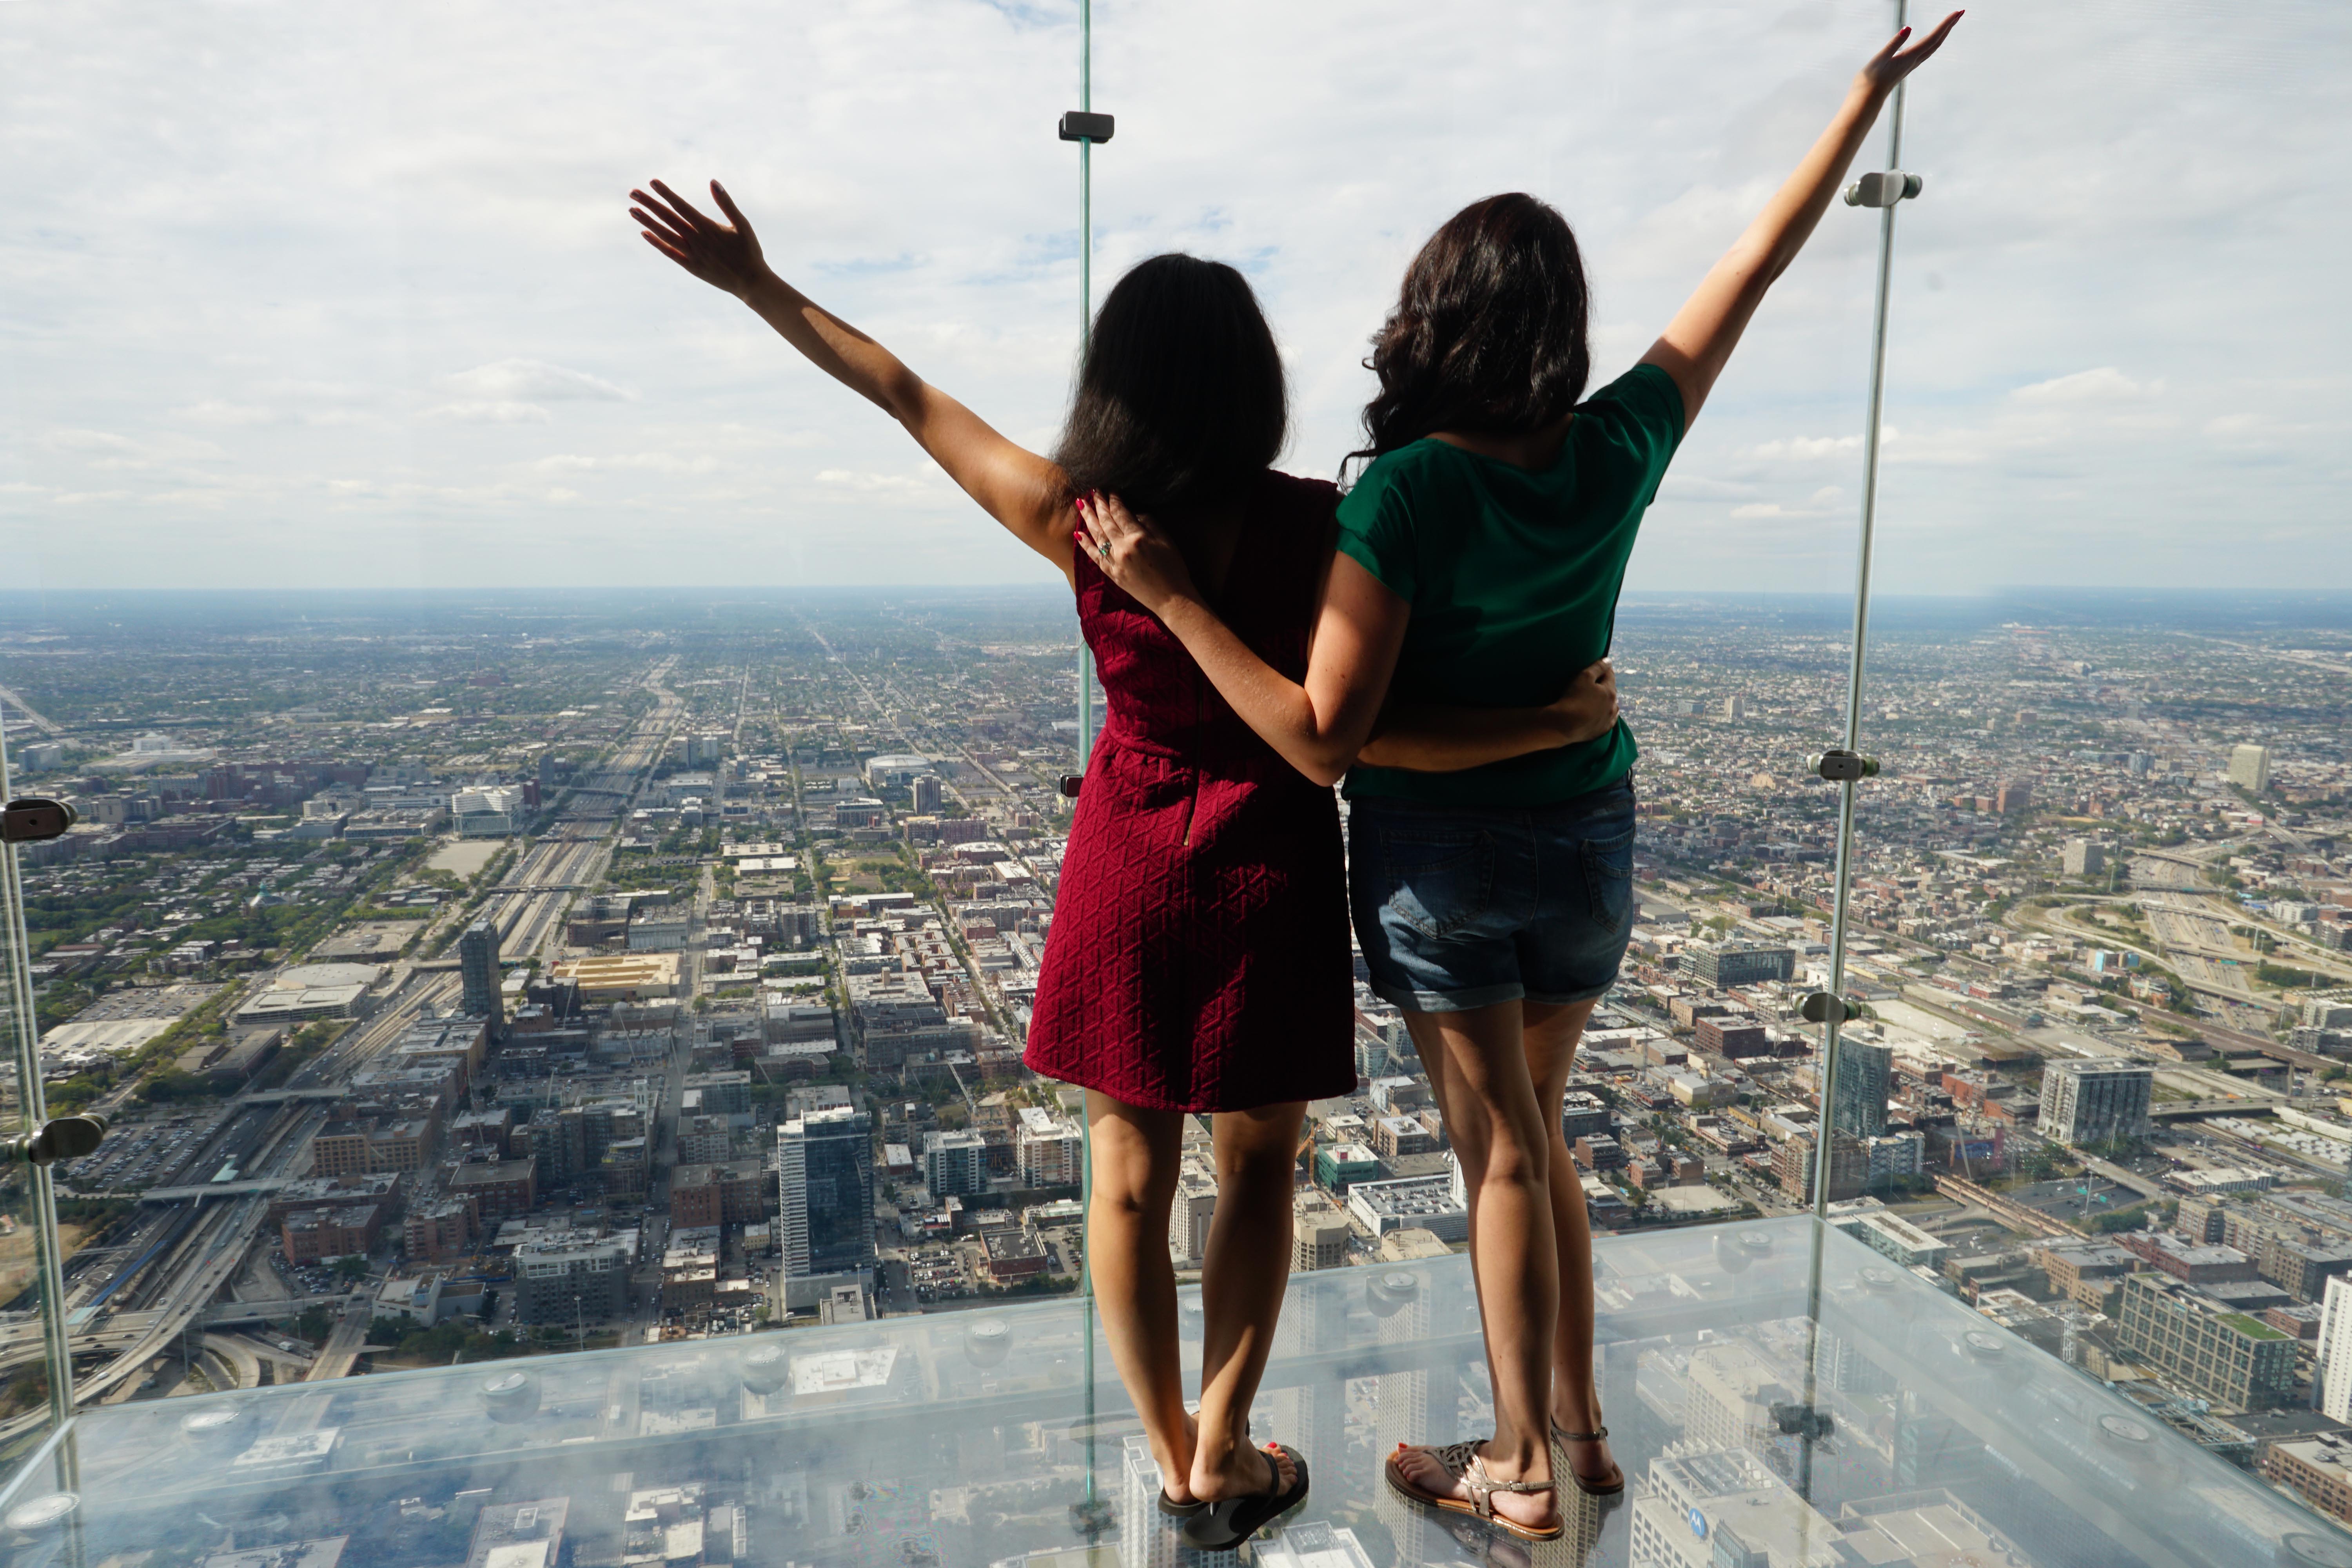 Women at Skydeck The Ledge looking out with arms up